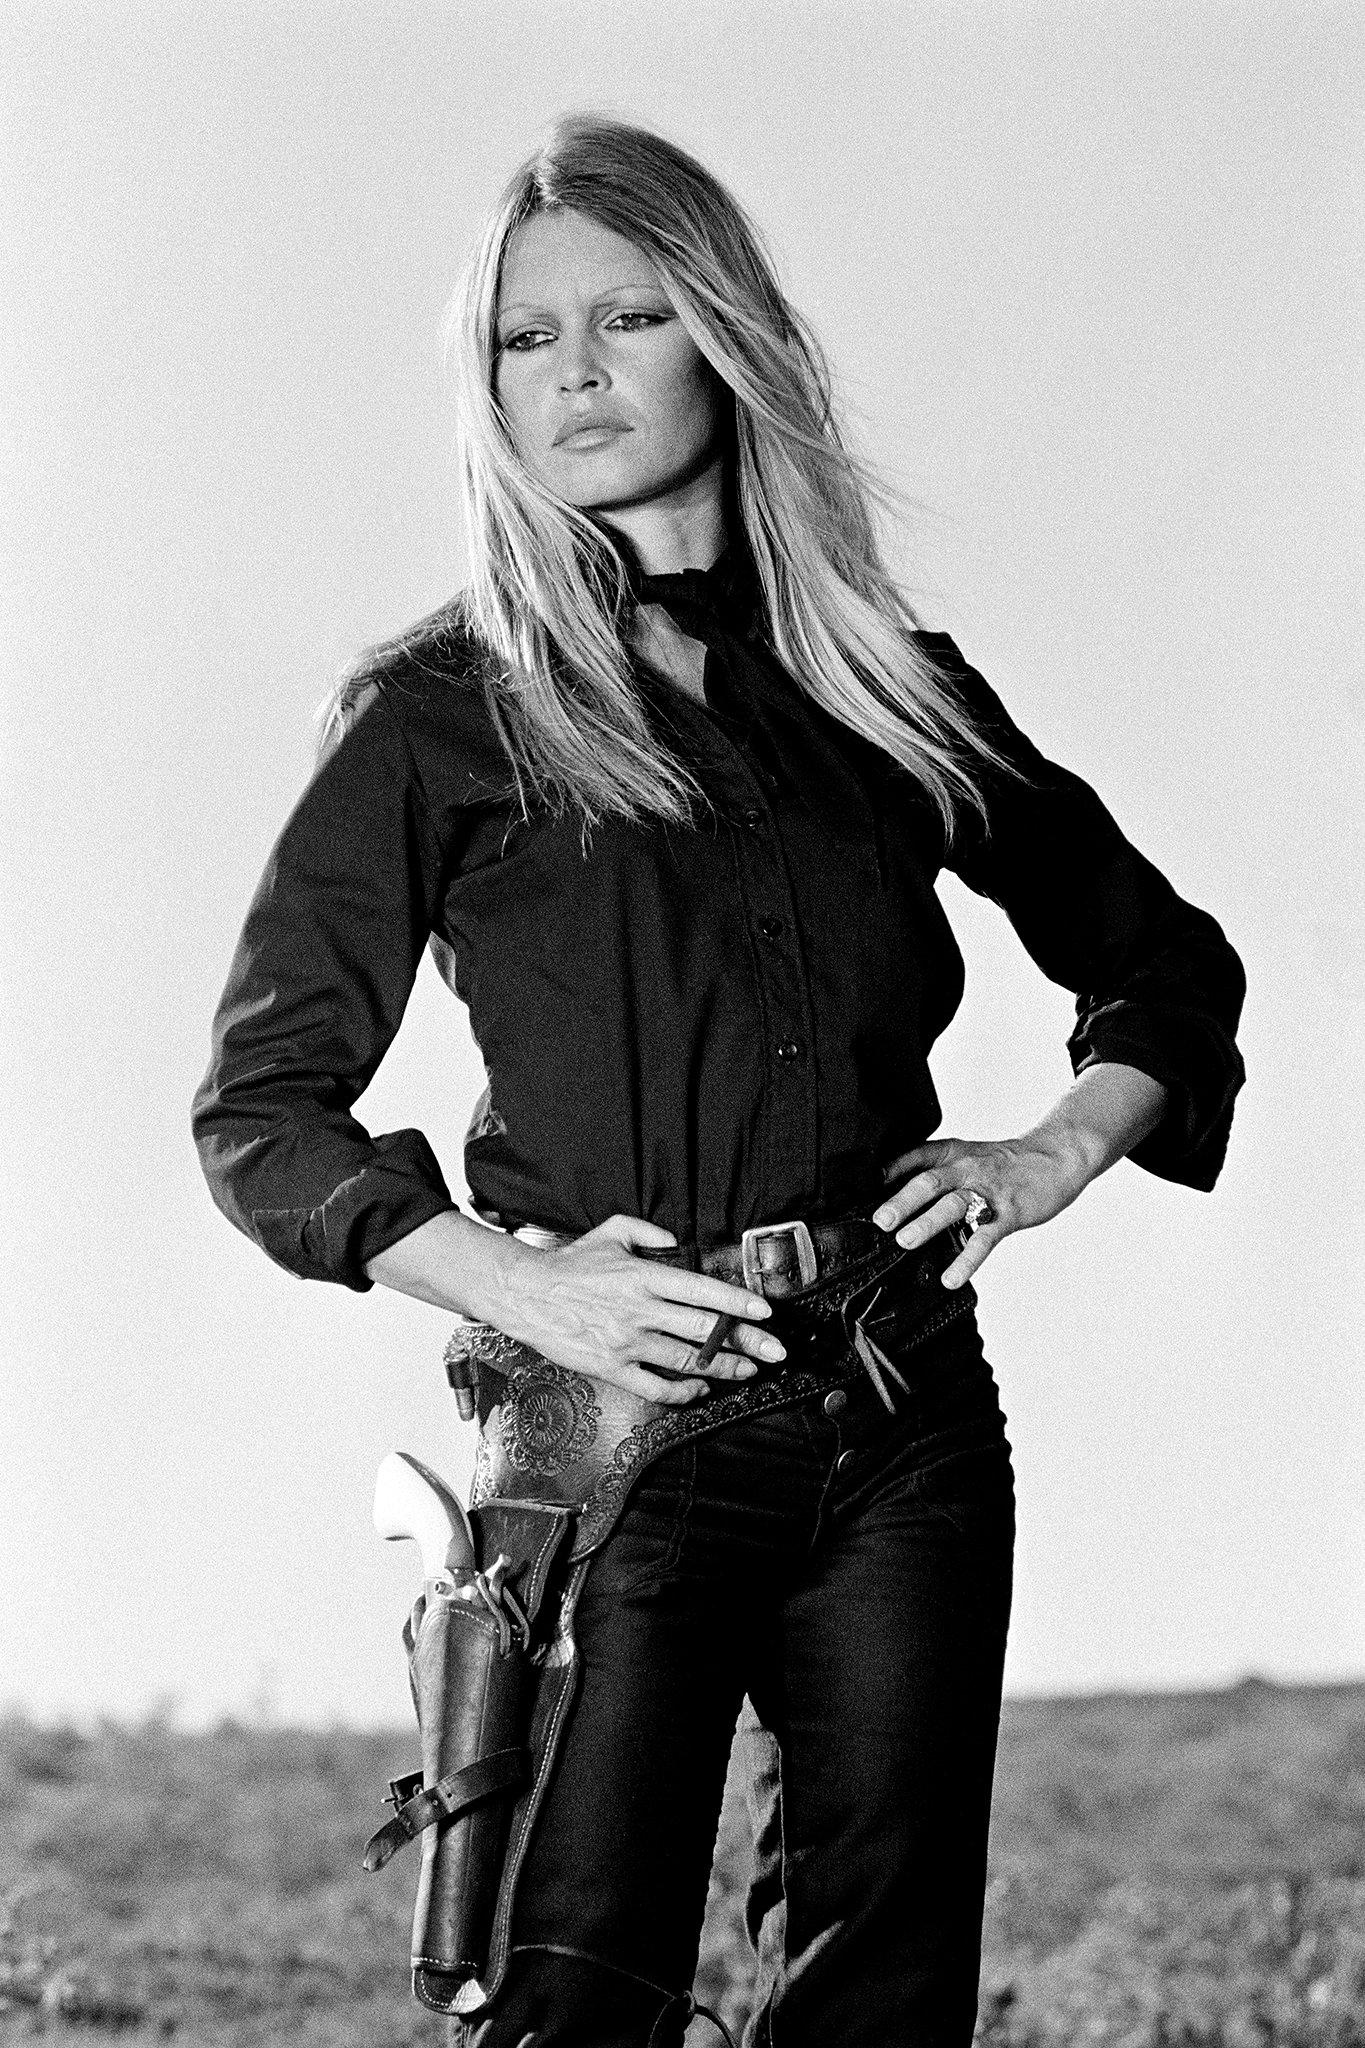 Brigitte Bardot, 1971 - Terry O'Neill (Portrait Photography)
Signed and numbered
Silver gelatin print

Available in the following sizes:
12 x 16 inches, edition of 50 + 10 APs
16 x 20 inches, edition of 50 + 10 APs
20 x 24 inches, edition of 50 + 10